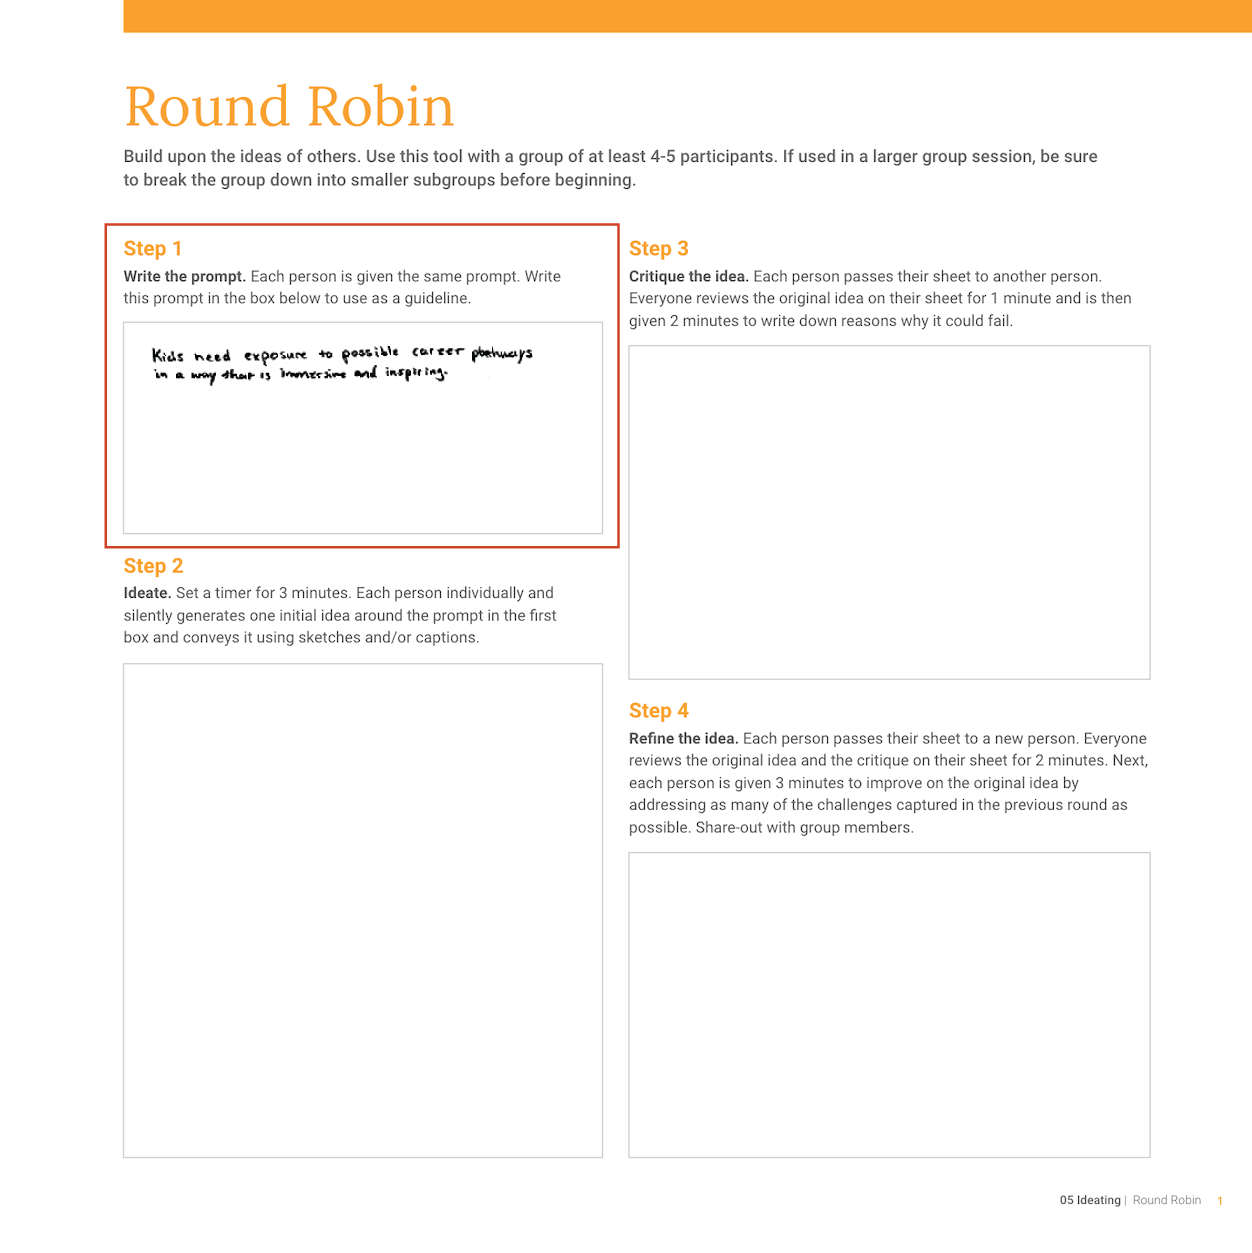 sample round robin worksheet with step 1 filled in